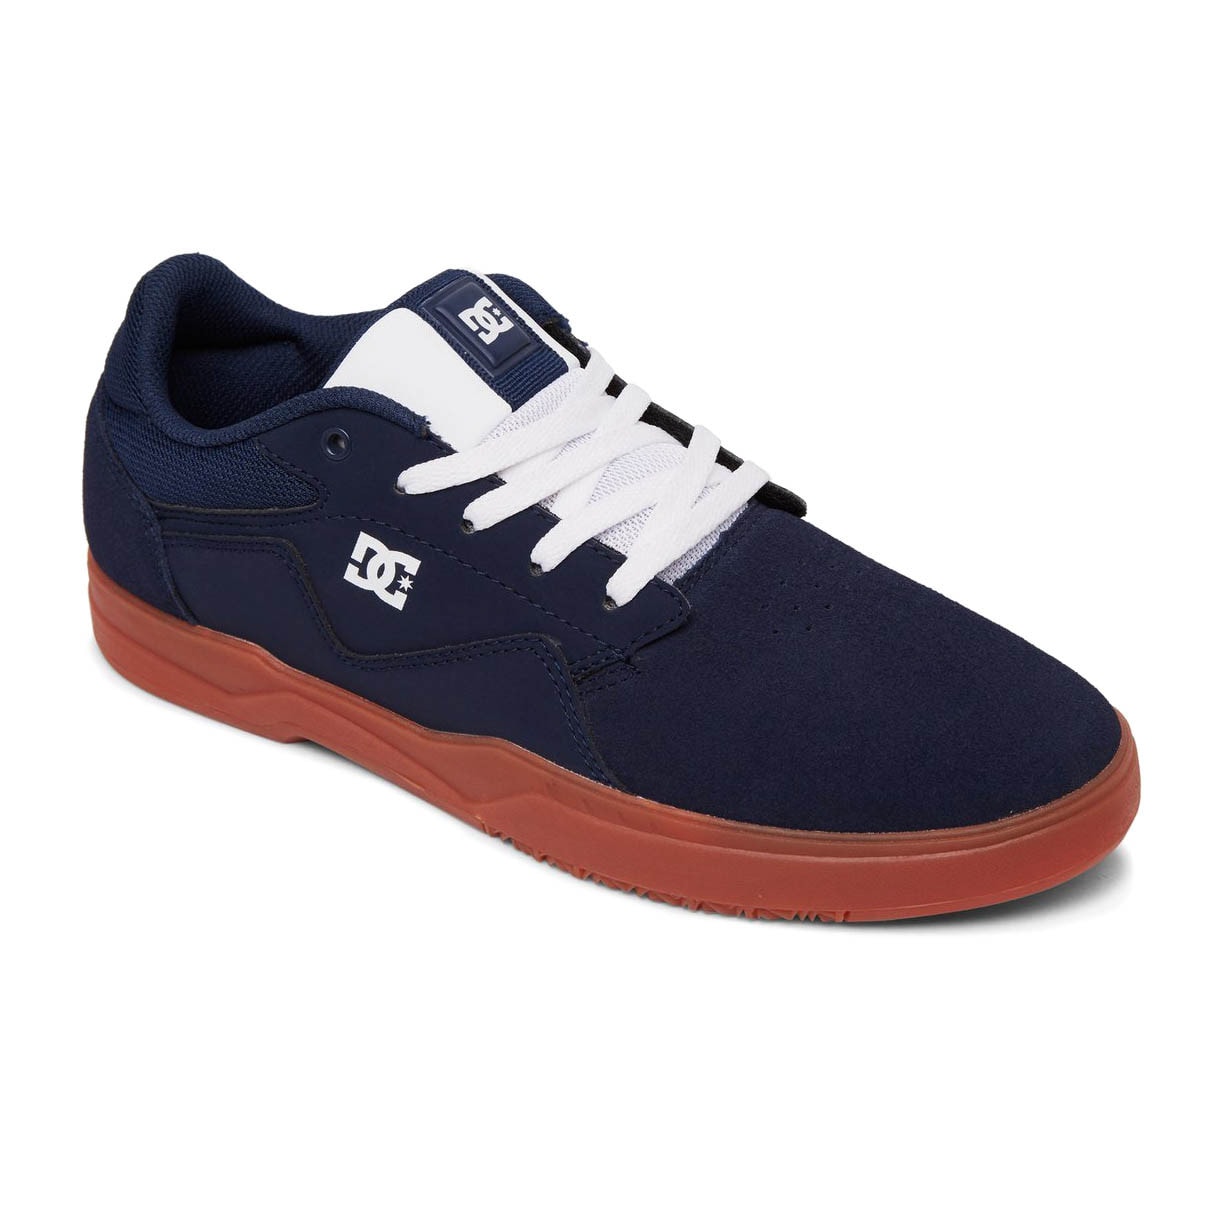 Sneakers DC Barksdale dc navy/gum 